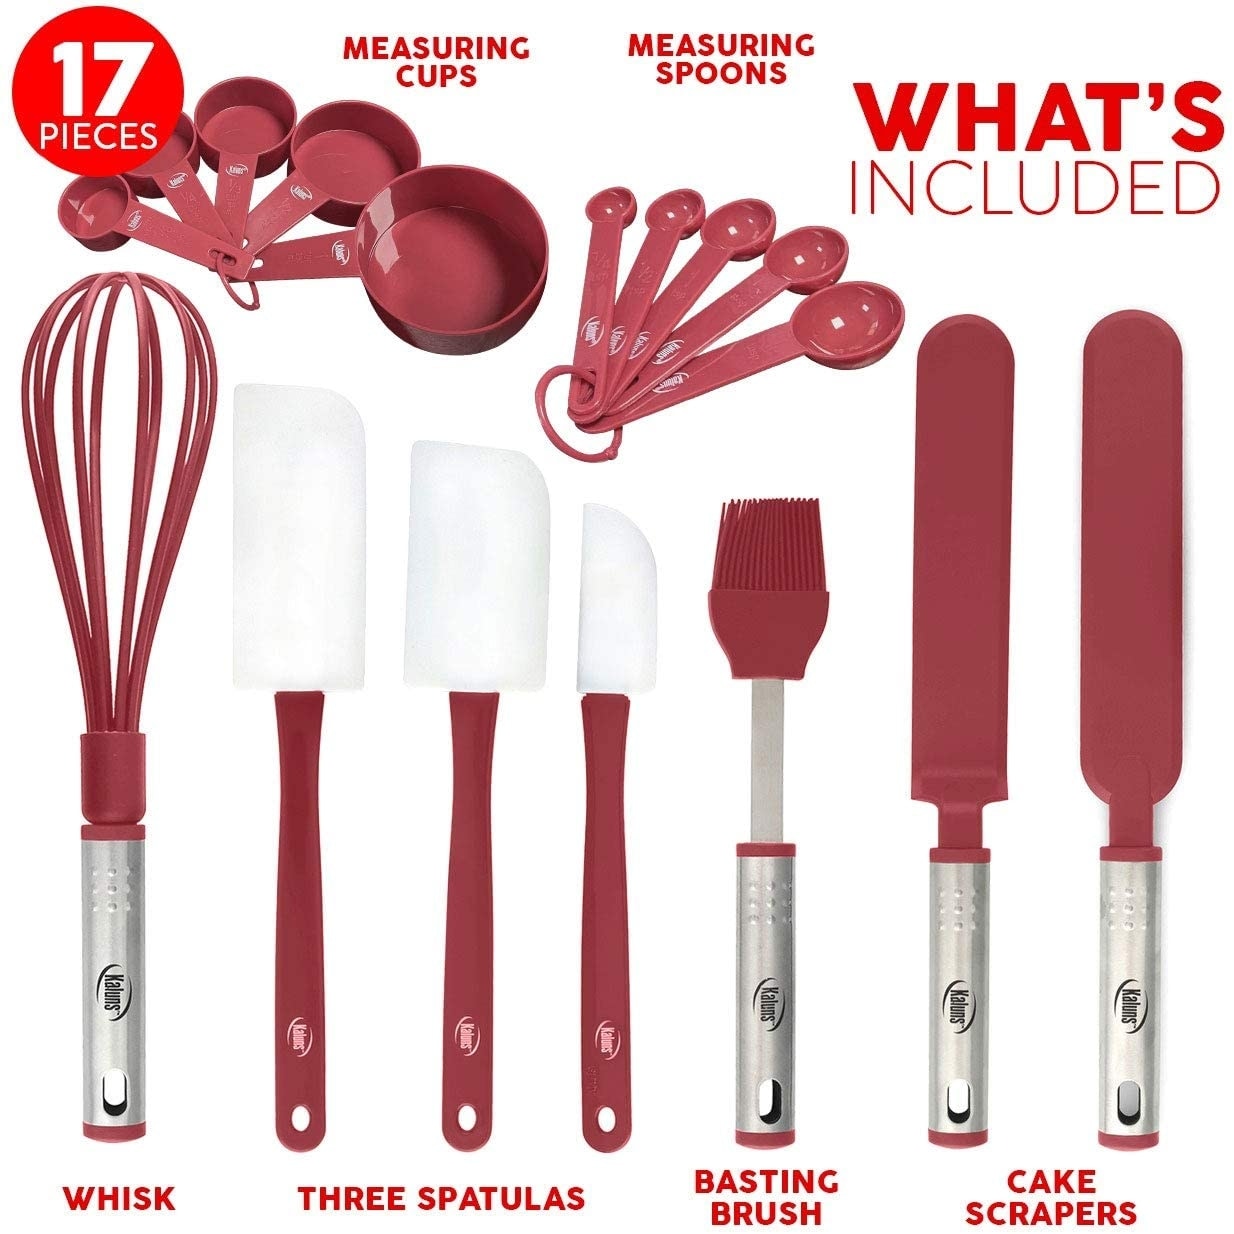 K & G Silicone Cooking Utensils Set 11 Pcs Red Kitchen Utensils Set with Holder, Spatula, Whisk, Tongs, Soup Ladle, Silicone Spoon & More. Non-Stick